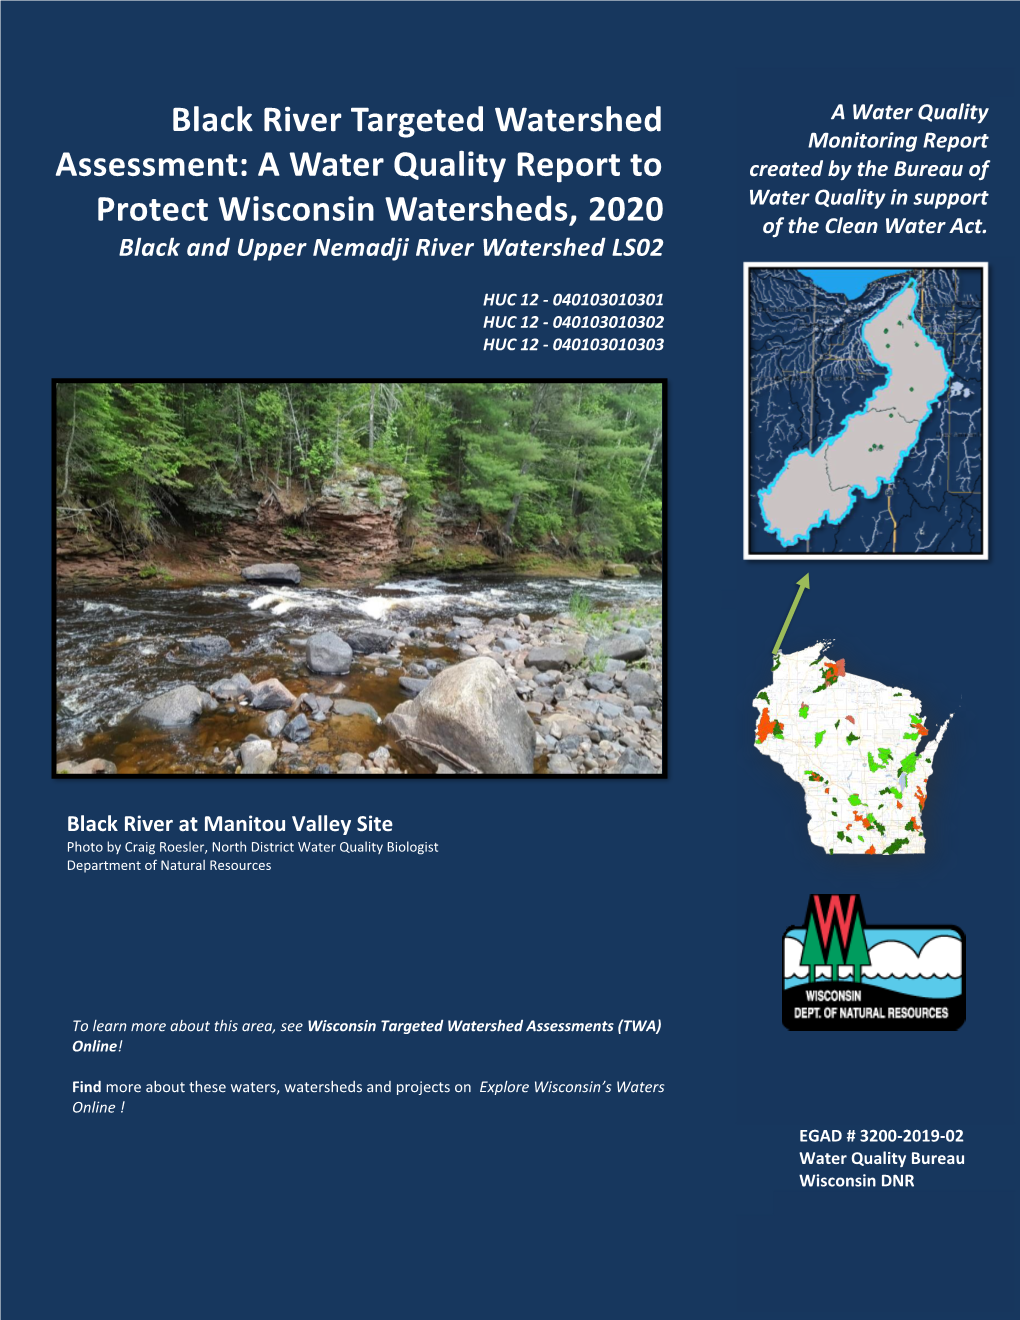 Black River Targeted Watershed Assessment: a Water Quality Report to Protect Wisconsin Watersheds, 2020]